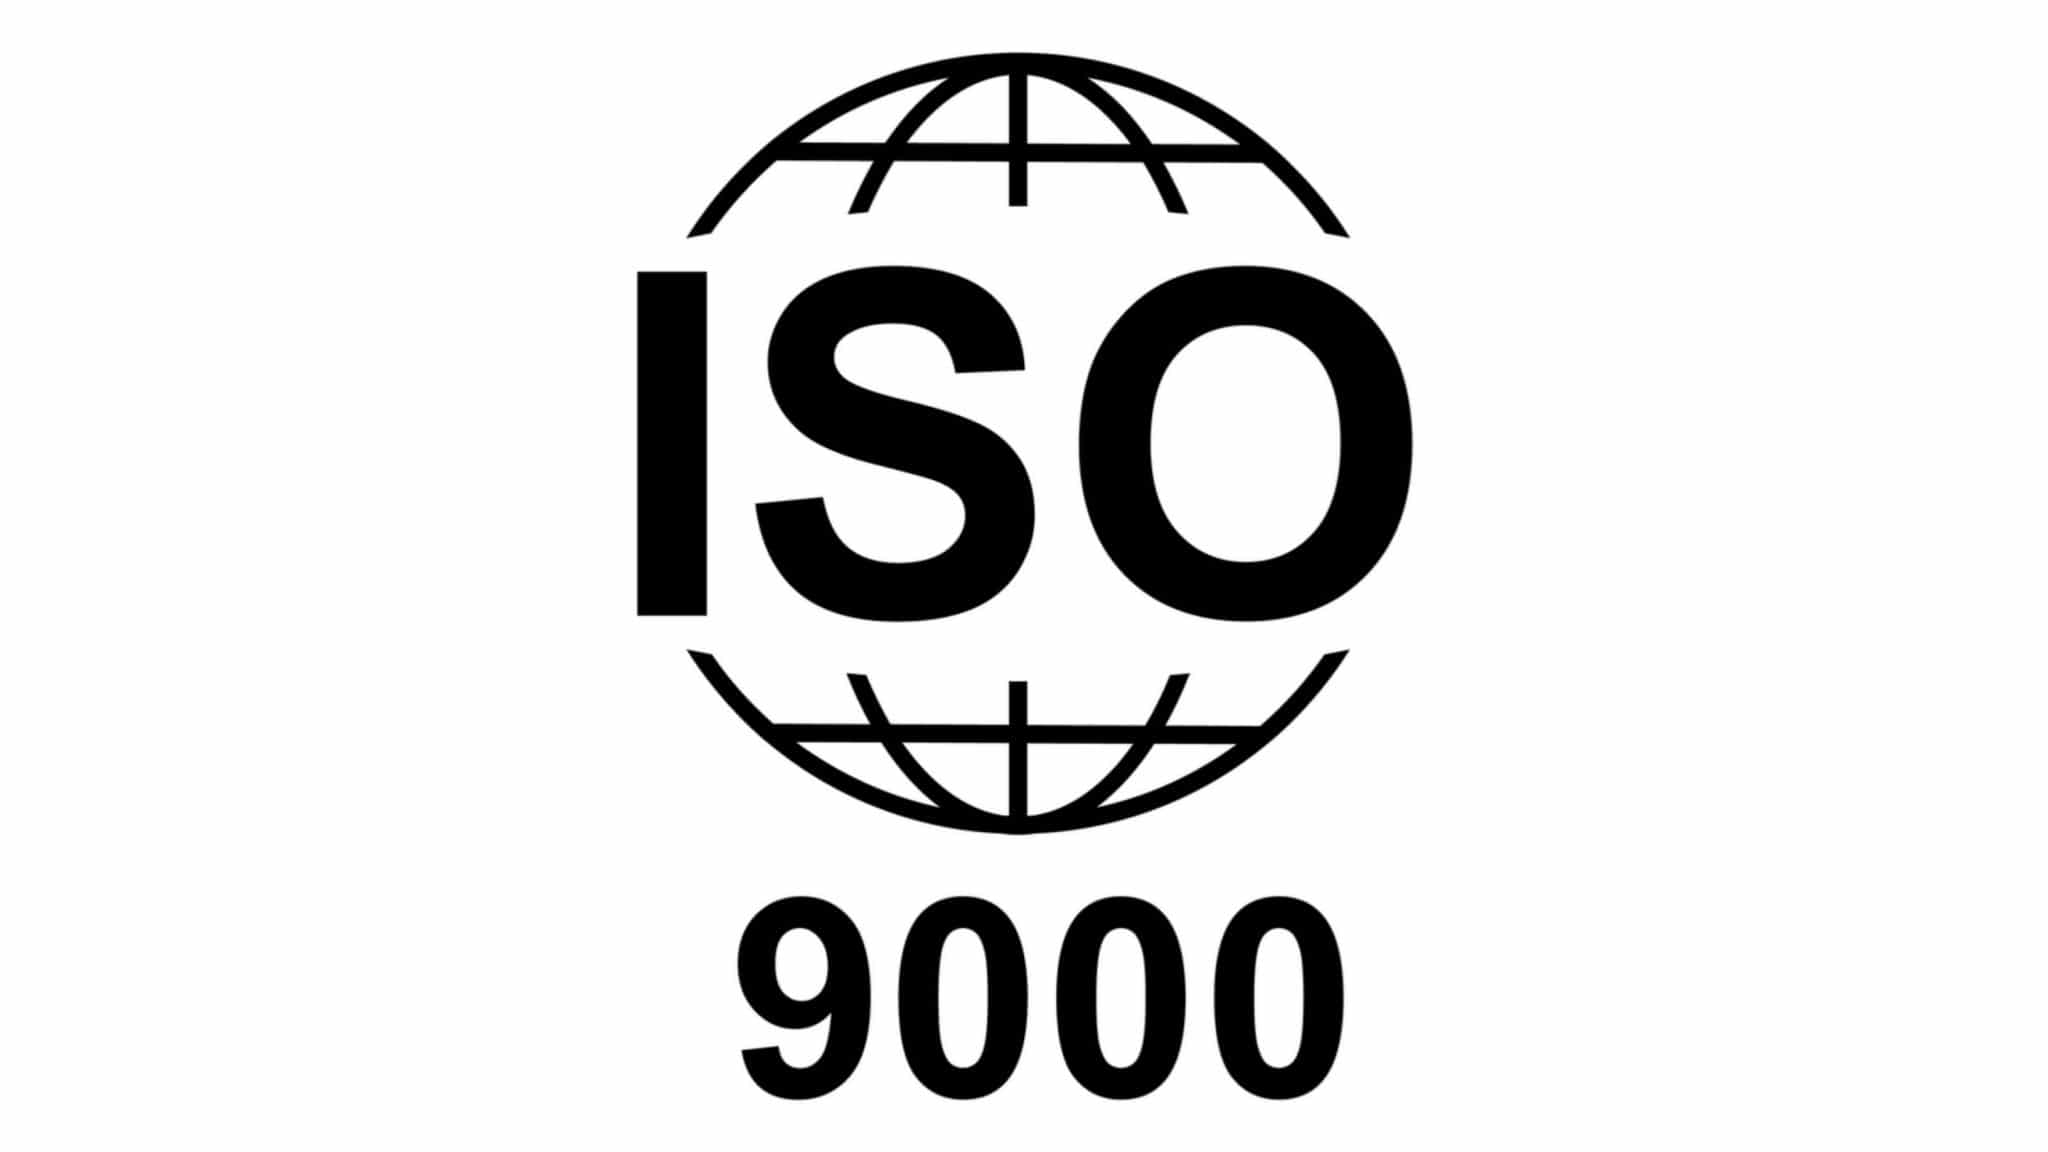 iso 9000 9001 9002 9003 9004